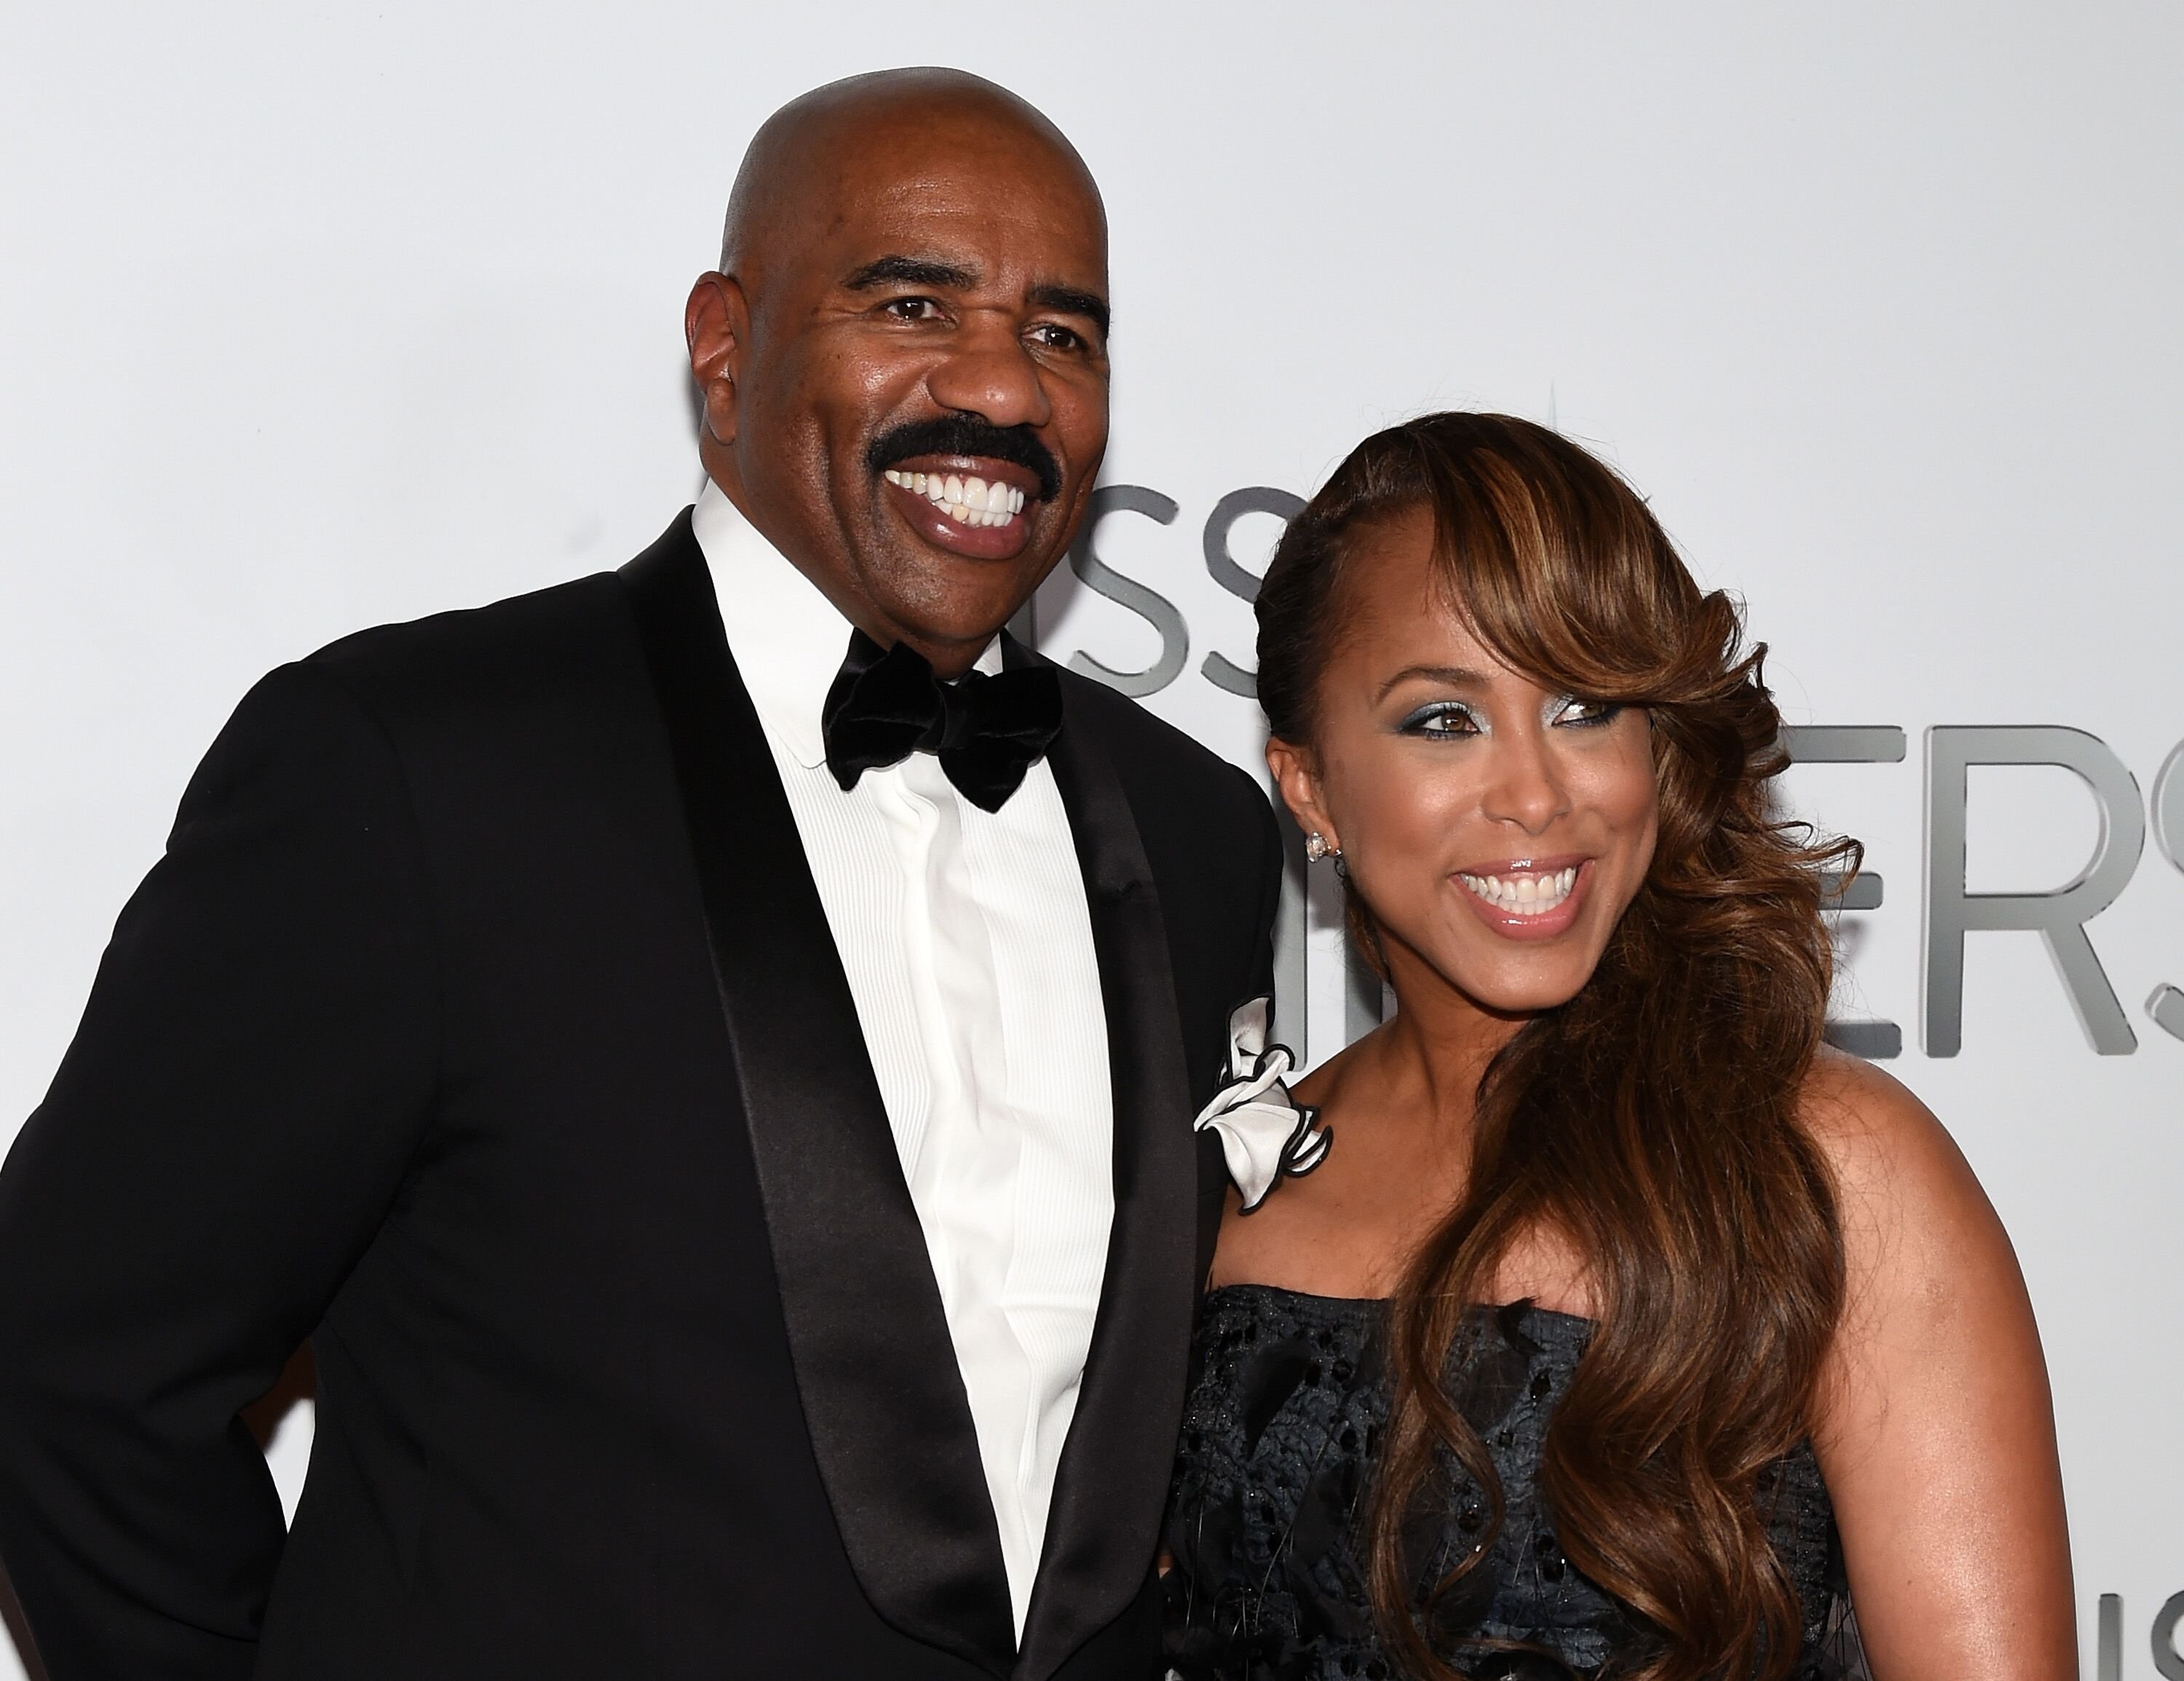 Steve and Marjorie  Harvey at the 2015 Miss Universe Pageant in Las Vegas | Source: Getty Images